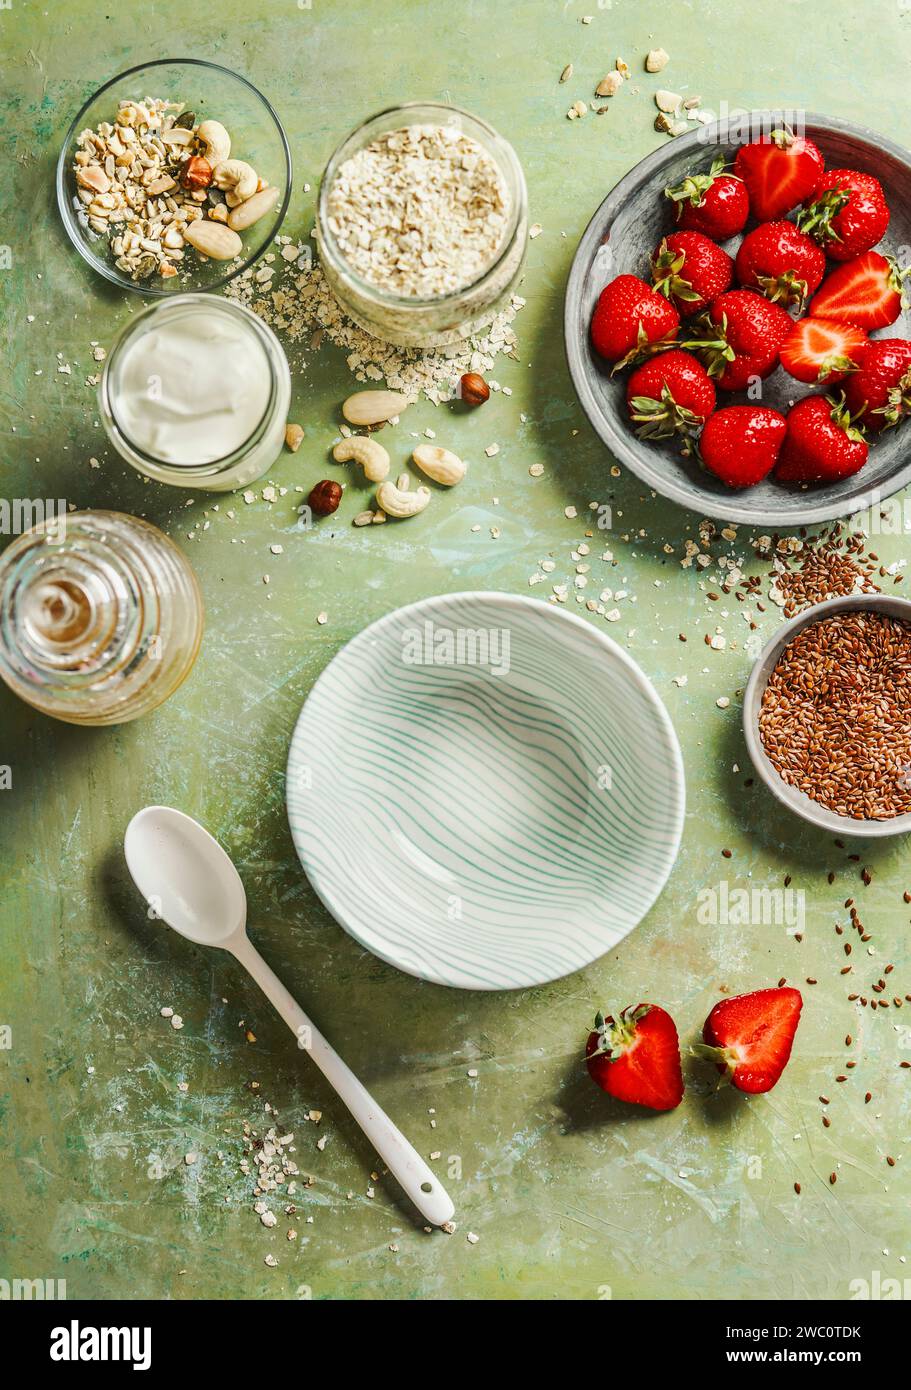 Healthy breakfast bowl preparation with oatmeal, yogurt, flax seeds,nuts and strawberries on green table background , top view Stock Photo